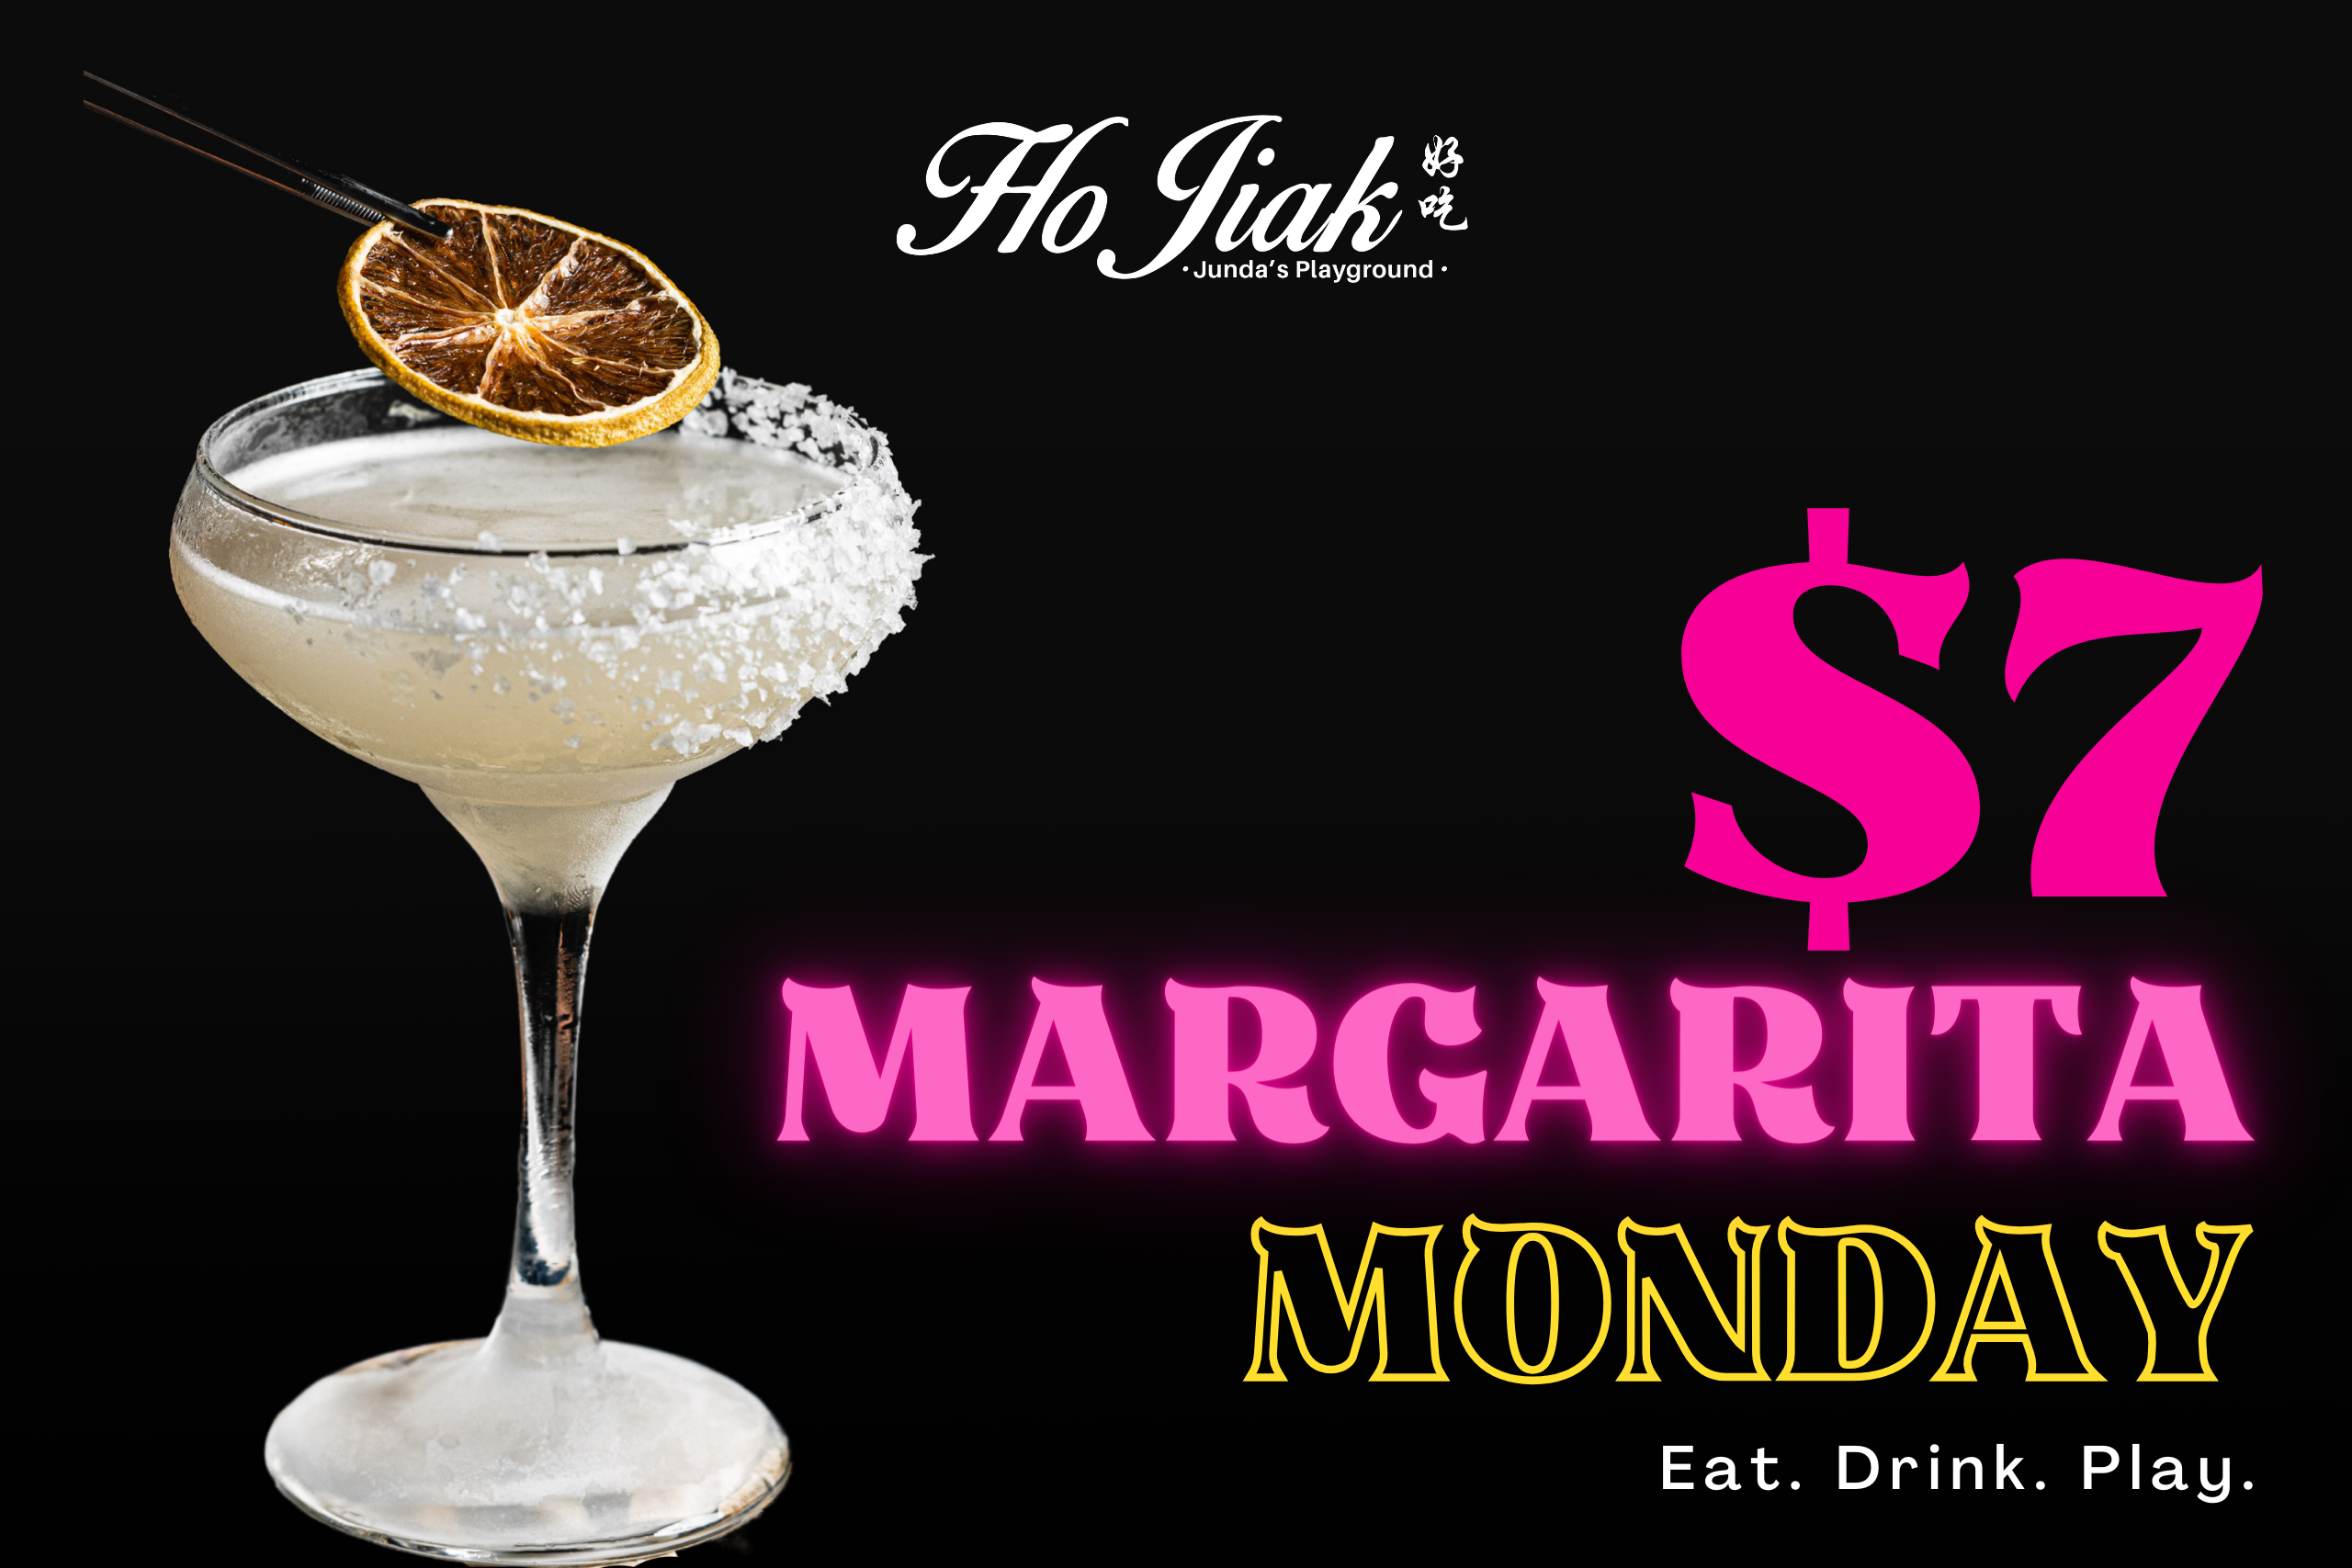 We’ll be shaking $7 Classic Margaritas All Day Monday. Sip on $7 Margaritas and Spice Up Your Week! Classic & Spicy Margaritas Available. Read More